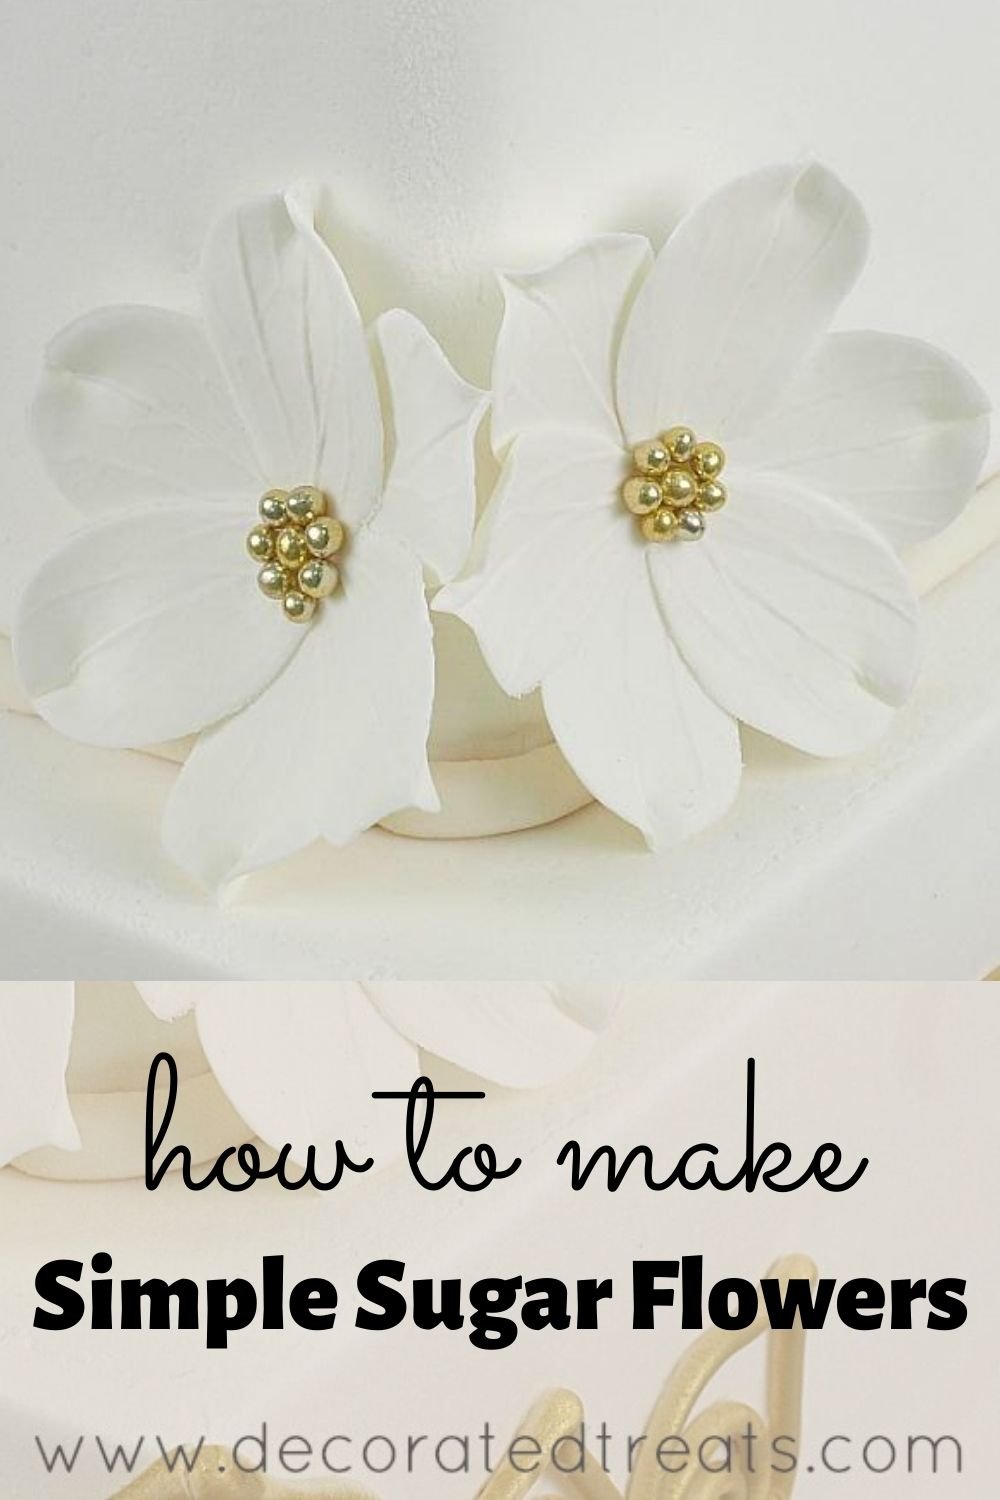 2 white gum paste flowers on the corner of a cake